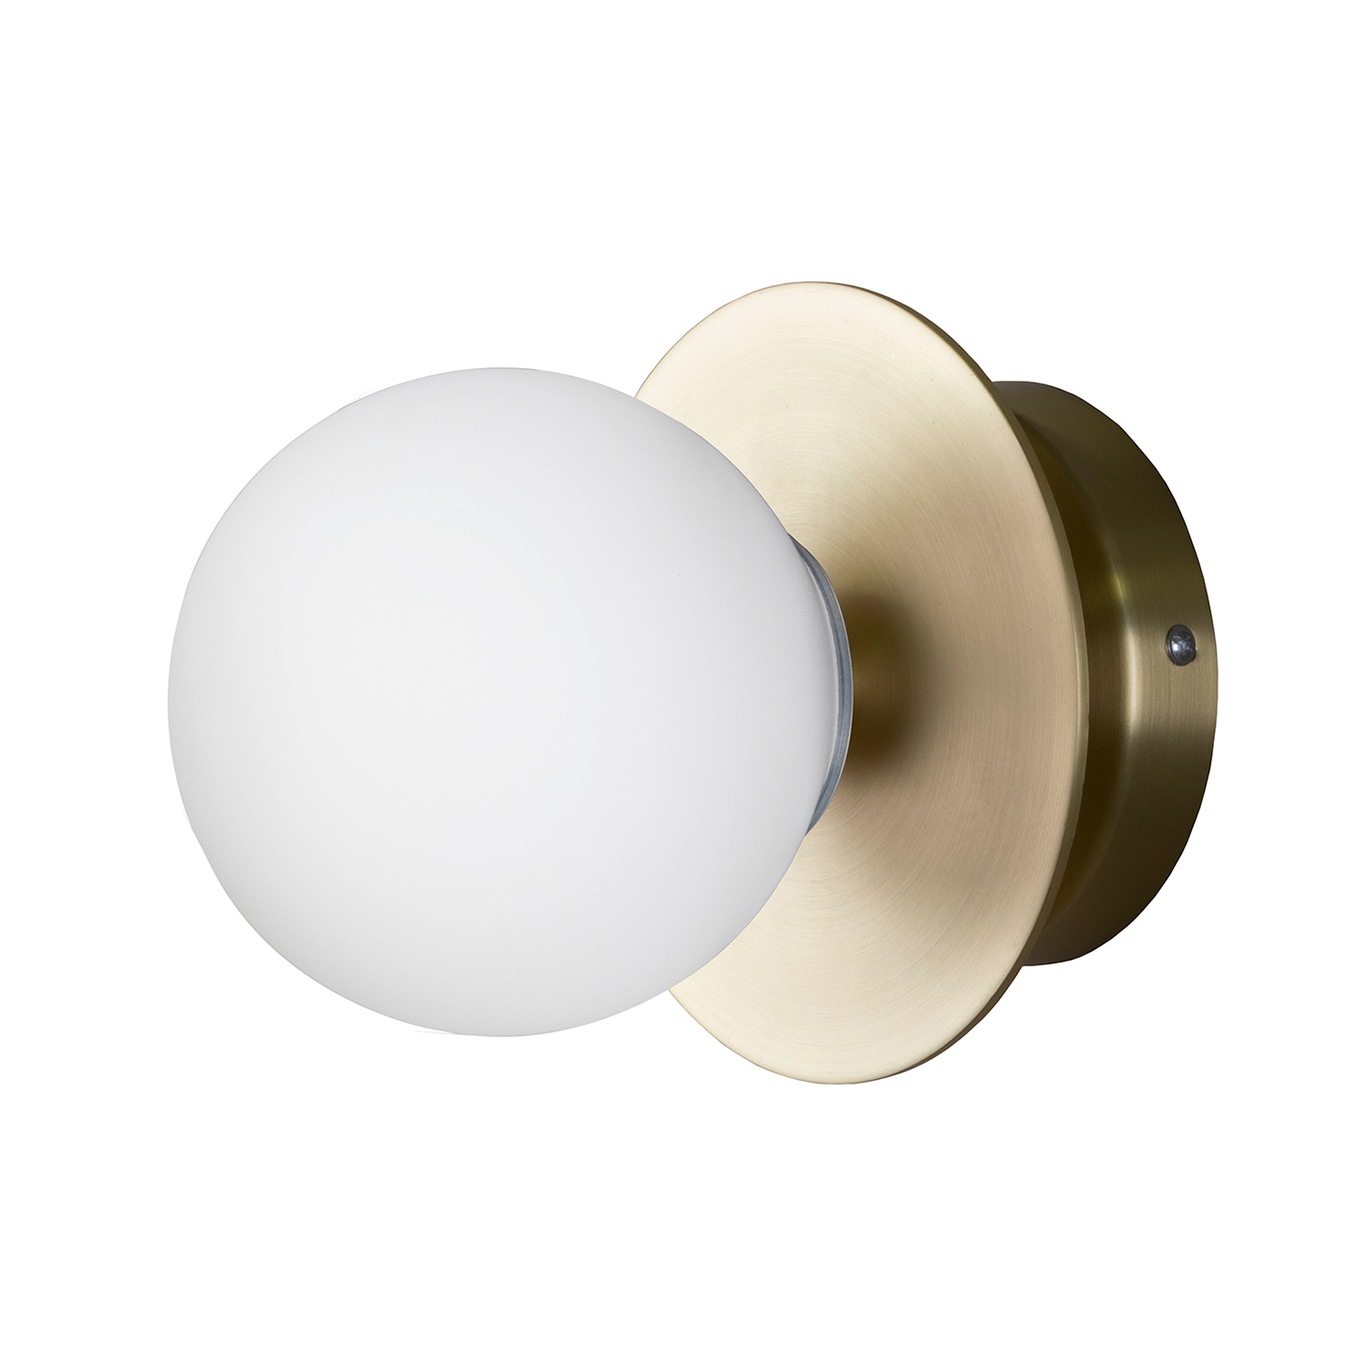 Art Deco Wall/Ceiling Lamp, Brushed Brass / White